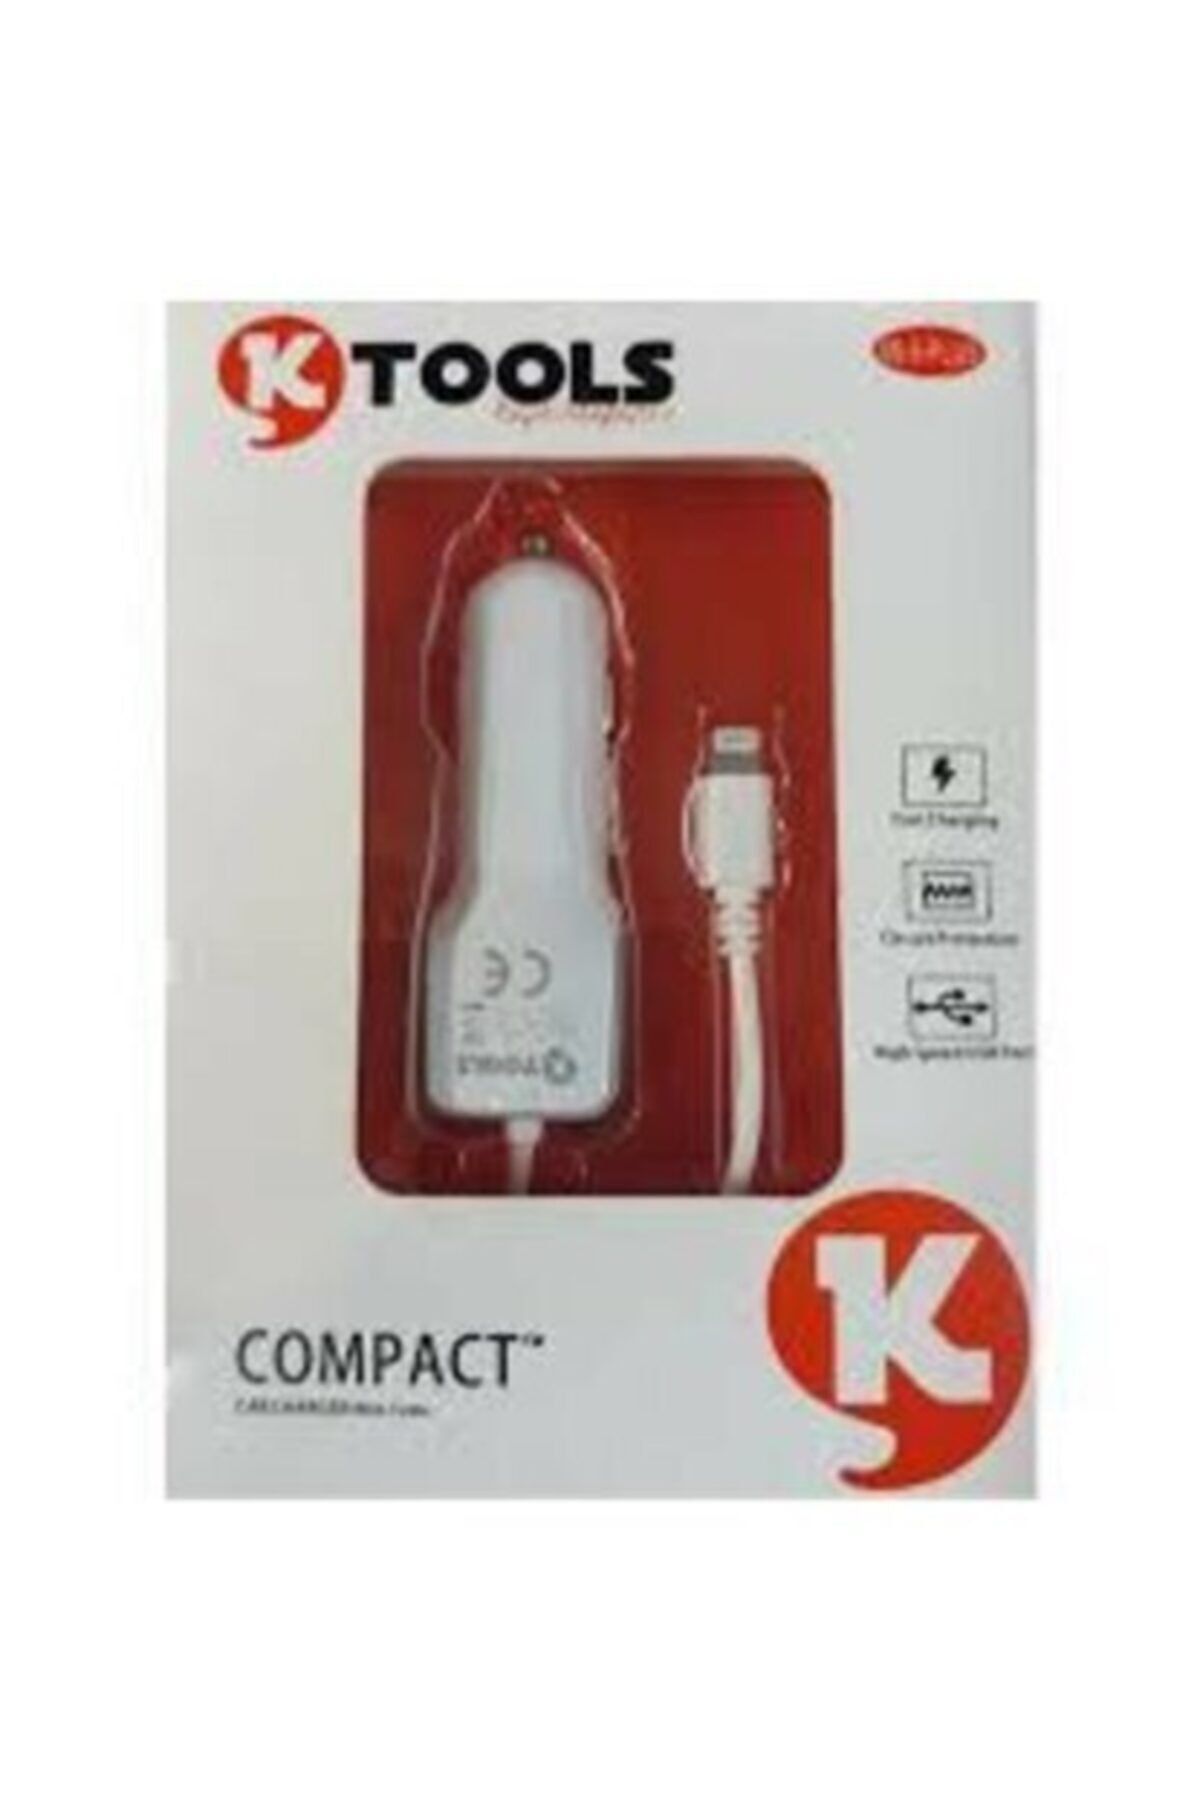 Ktools Usb Car Charger With Cable